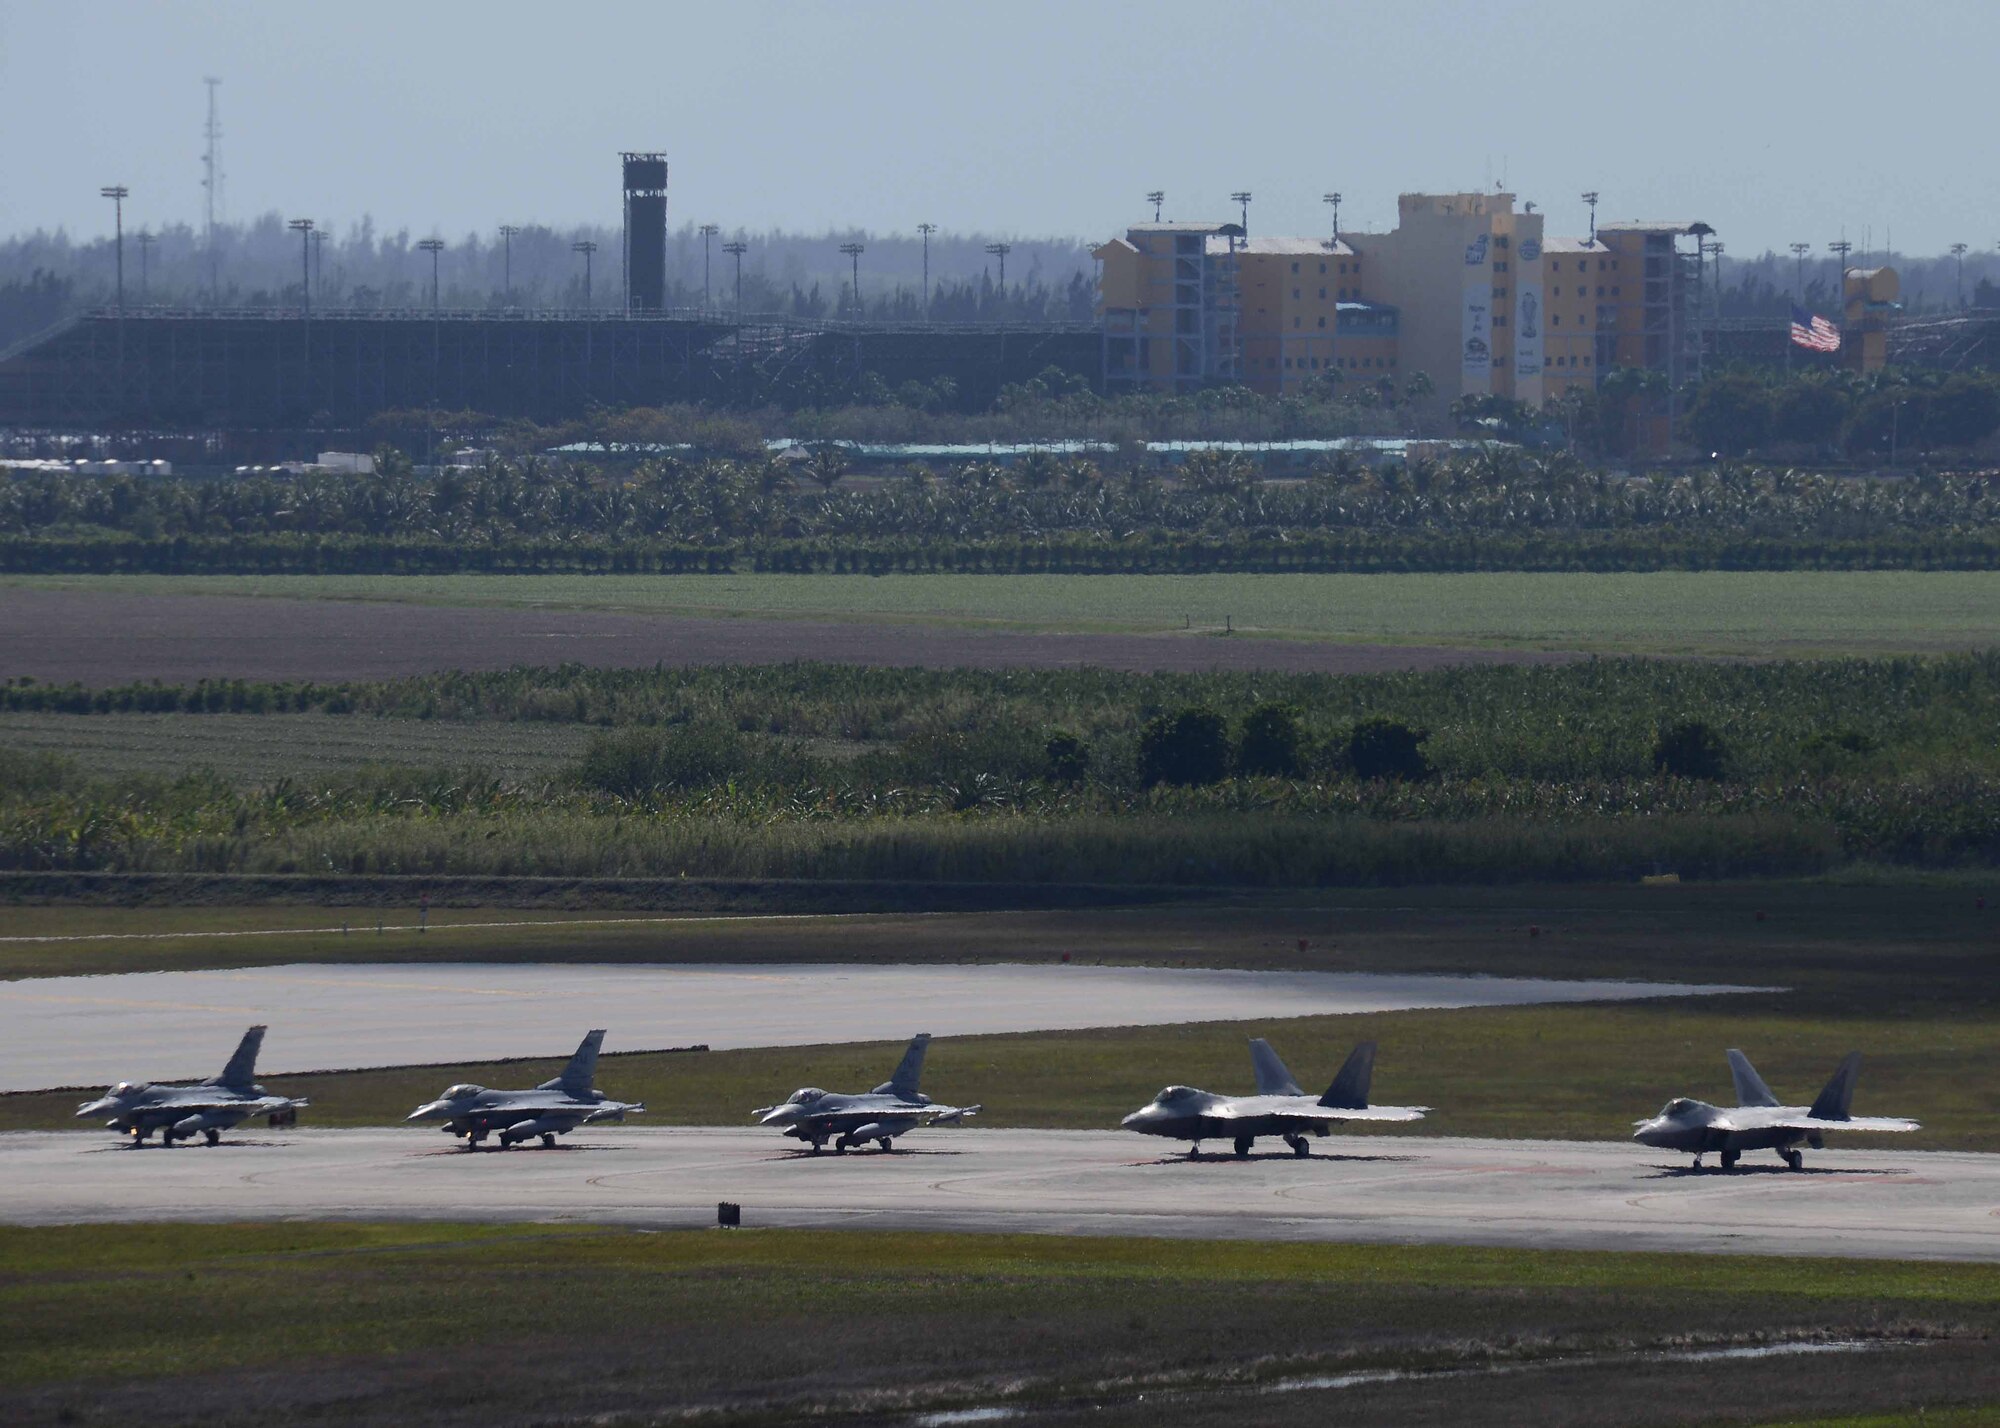 F-16 and F-22 aircraft wait for clearance from the tower to take-off March 2 during CHUMEX at Homestead Air Reserve Base, Florida. CHUMEX, hosted by the 482nd Fighter Wing, Homestead ARB, brings together multiple units and aircraft for training focused on teamwork and real-world combat scenarios. (U.S. Air Force photo by Staff Sgt. Jaimi L. Upthegrove)
